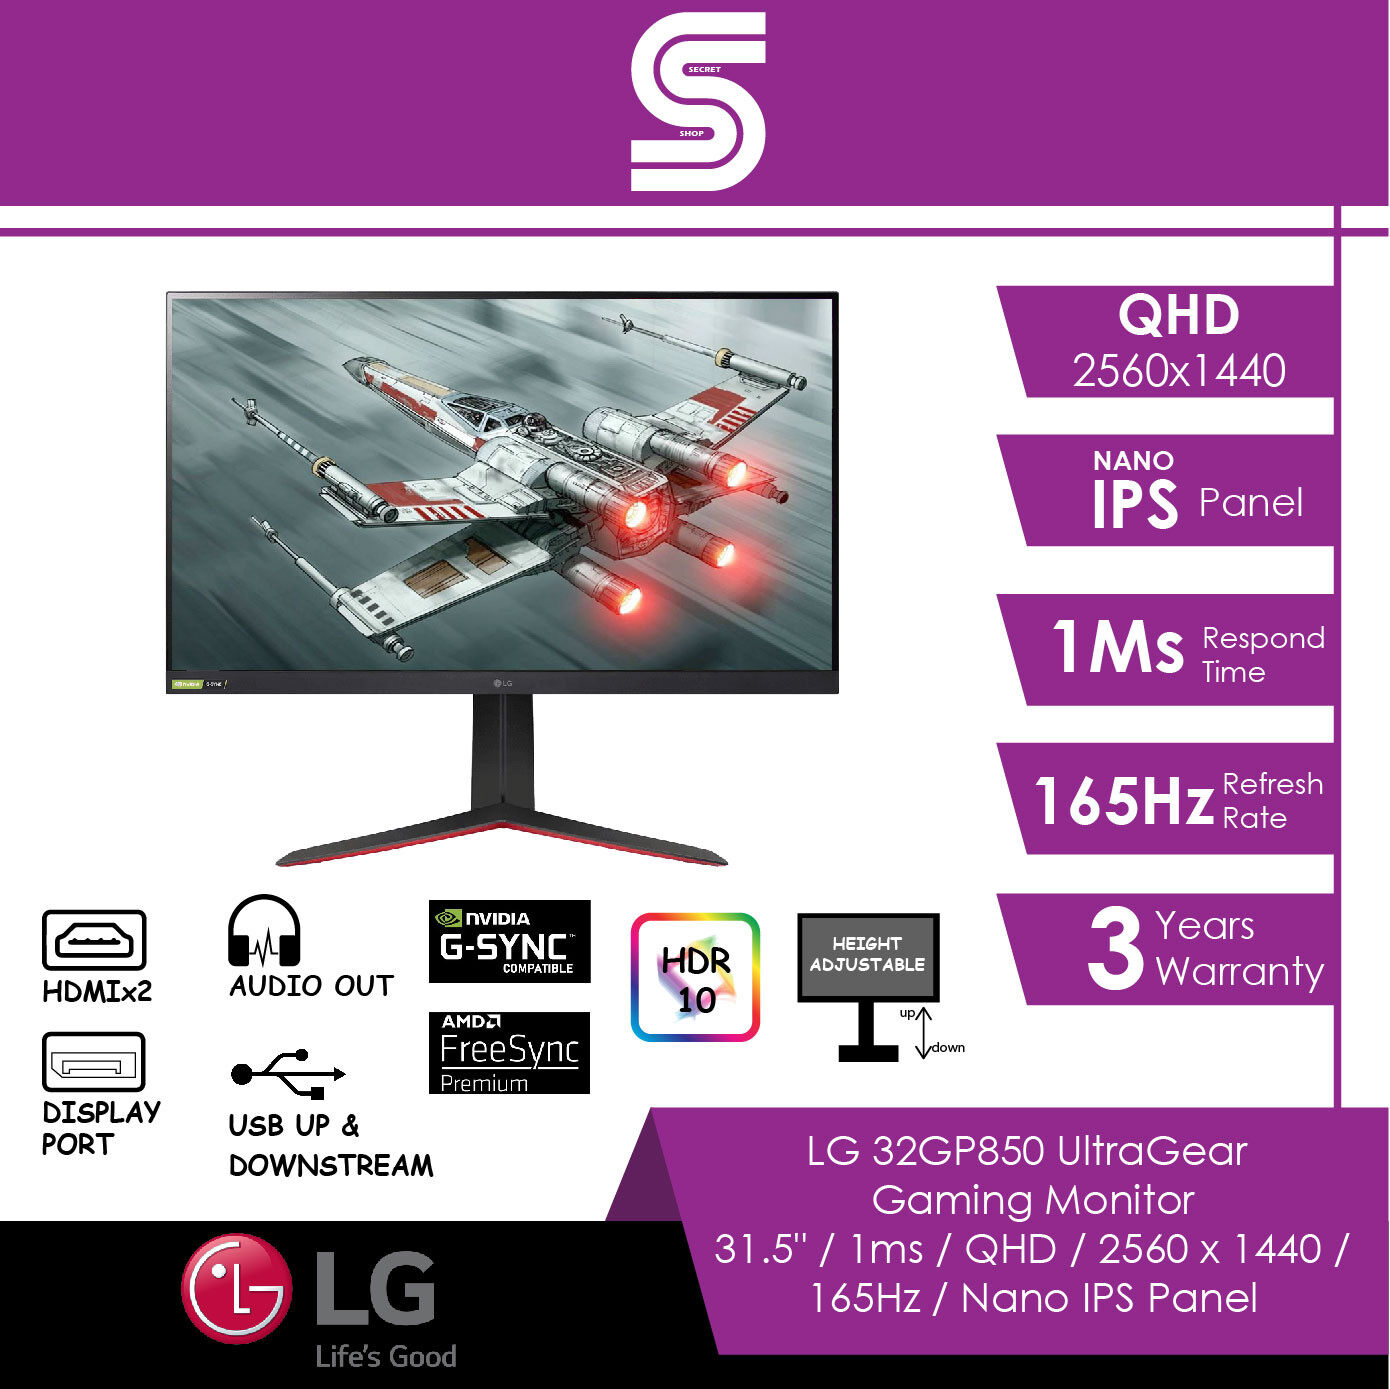 LG 32GP850 UltraGear Gaming Monitor - 31.5" / 1ms / QHD / 2560 x 1440 / 165Hz / Nano IPS Panel / HDMIx2 / DP / Audio Out / Height Adjustable Stand / USB Up & Downstream / HDR 10 / NVD G-Sync Compatible / AMD Free-Sync Premium